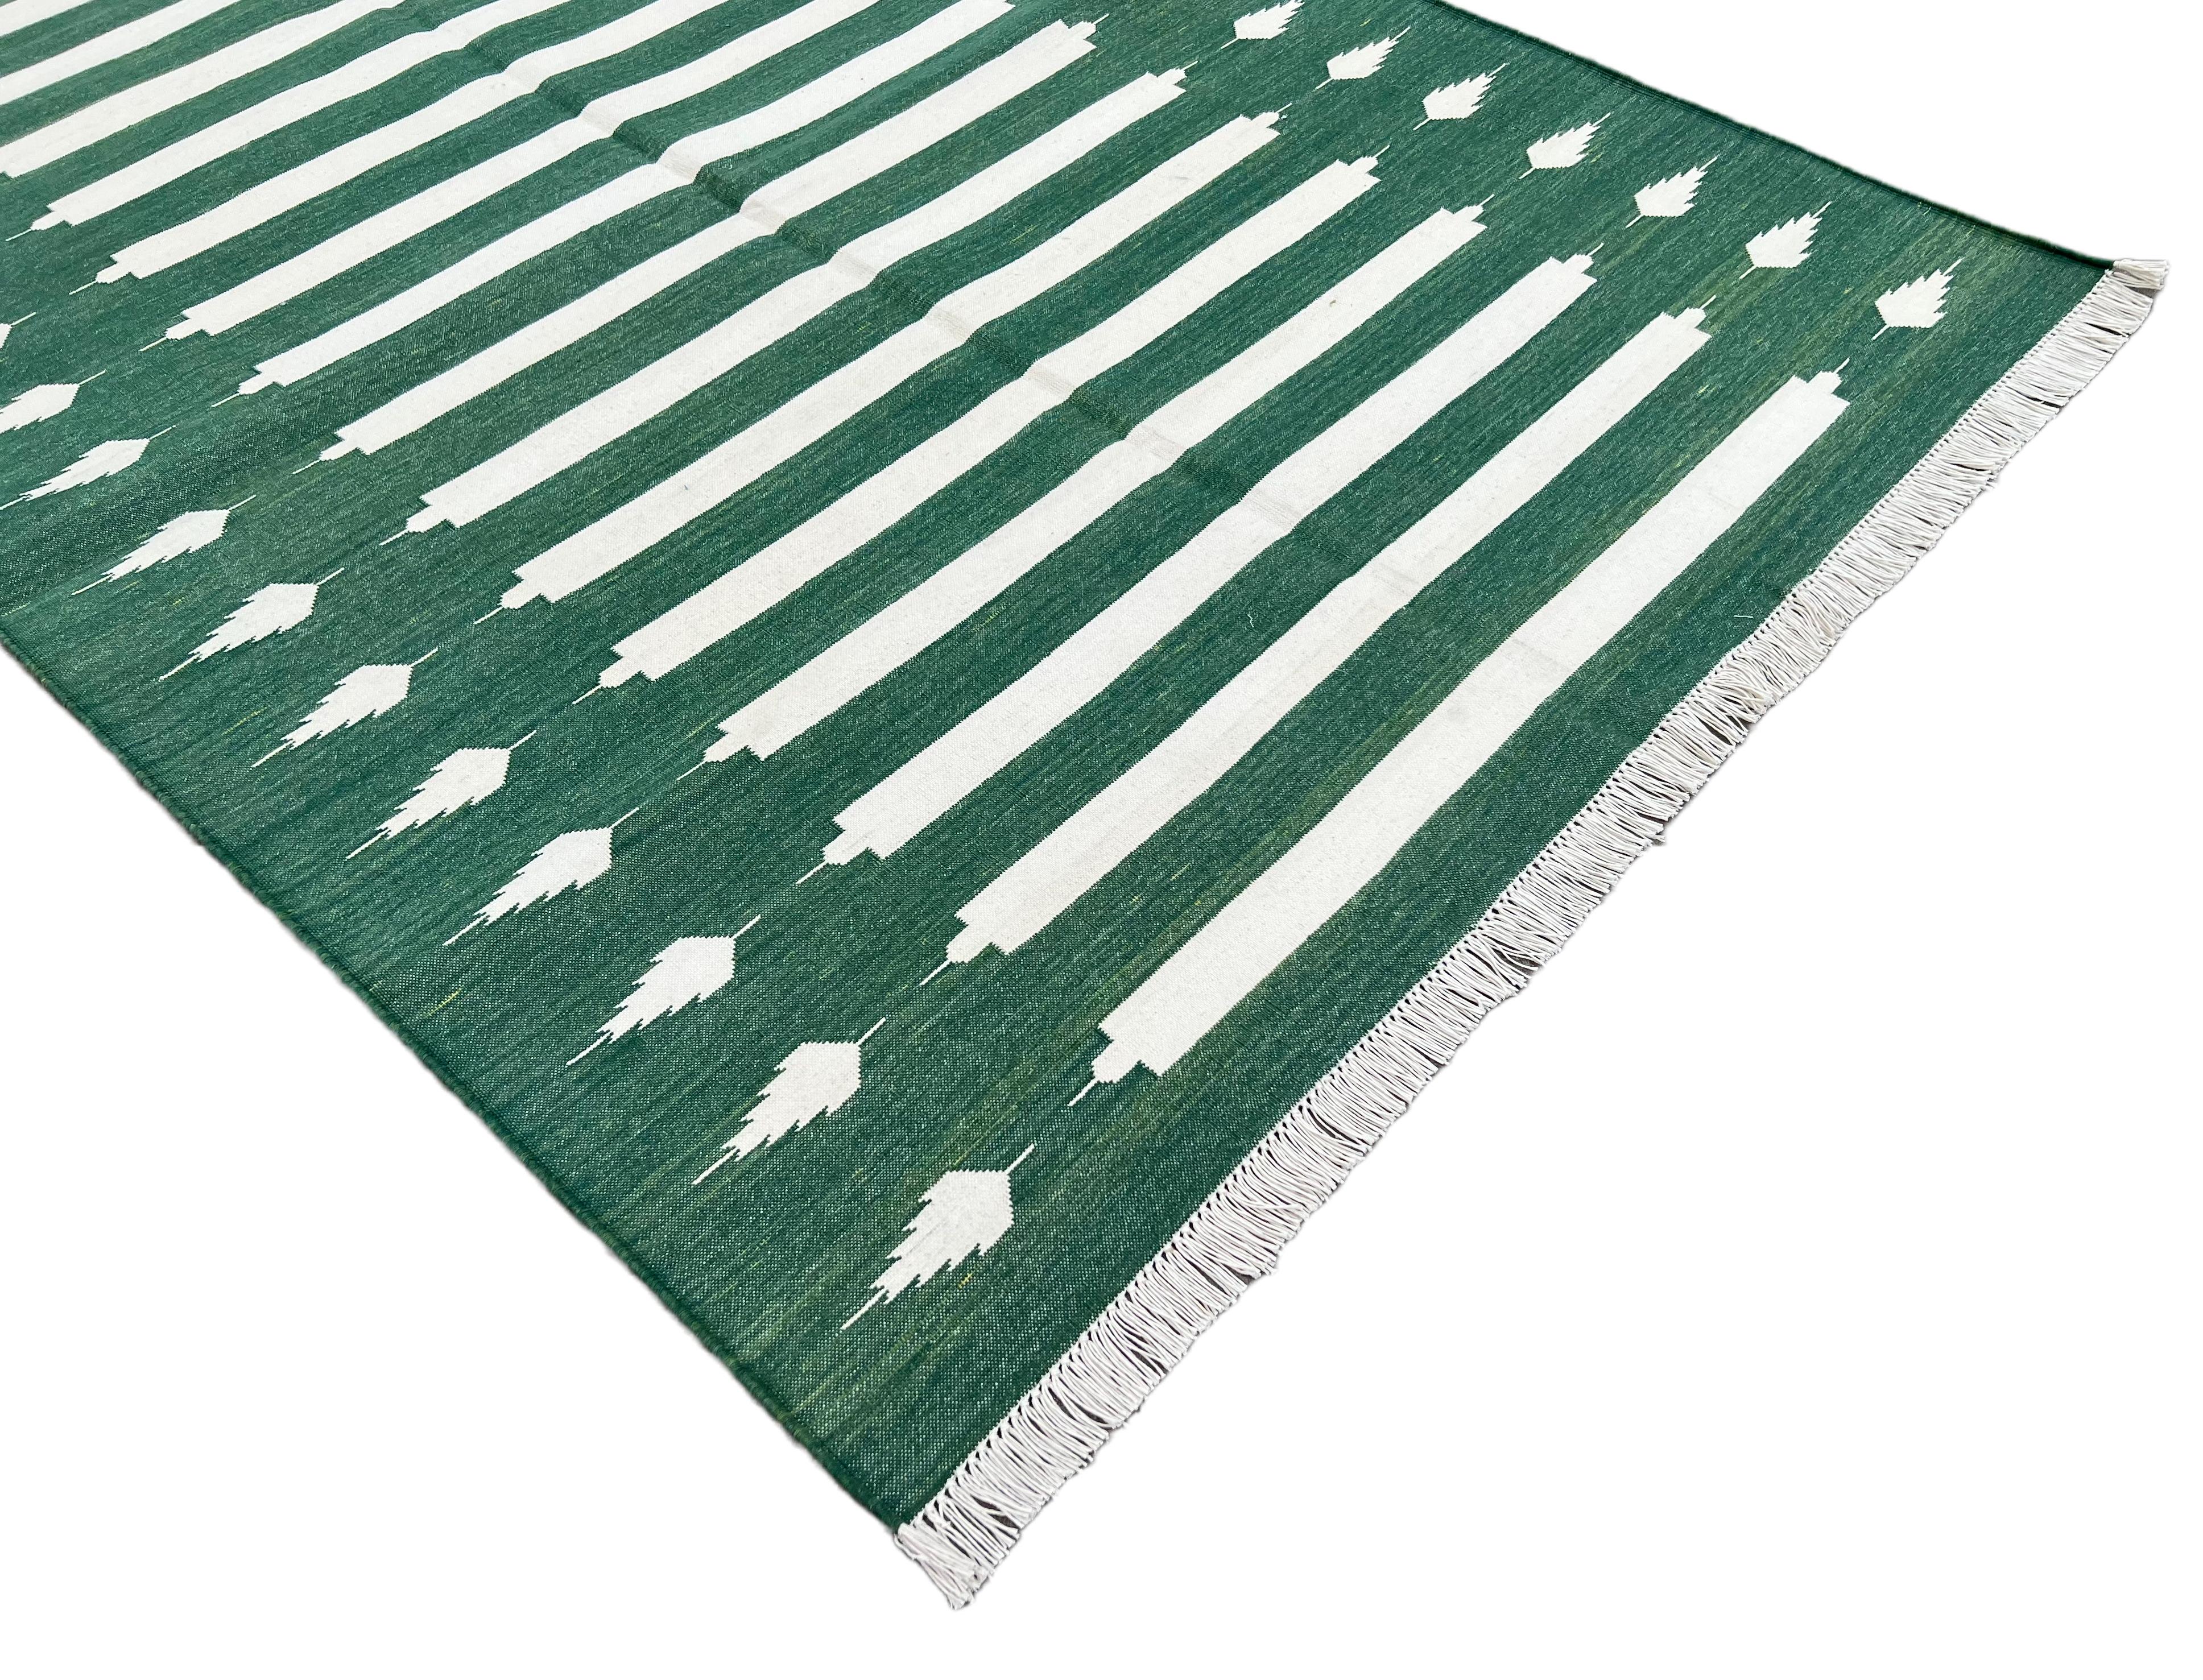 Hand-Woven Handmade Cotton Area Flat Weave Rug, 4x6 Green And White Striped Indian Dhurrie For Sale